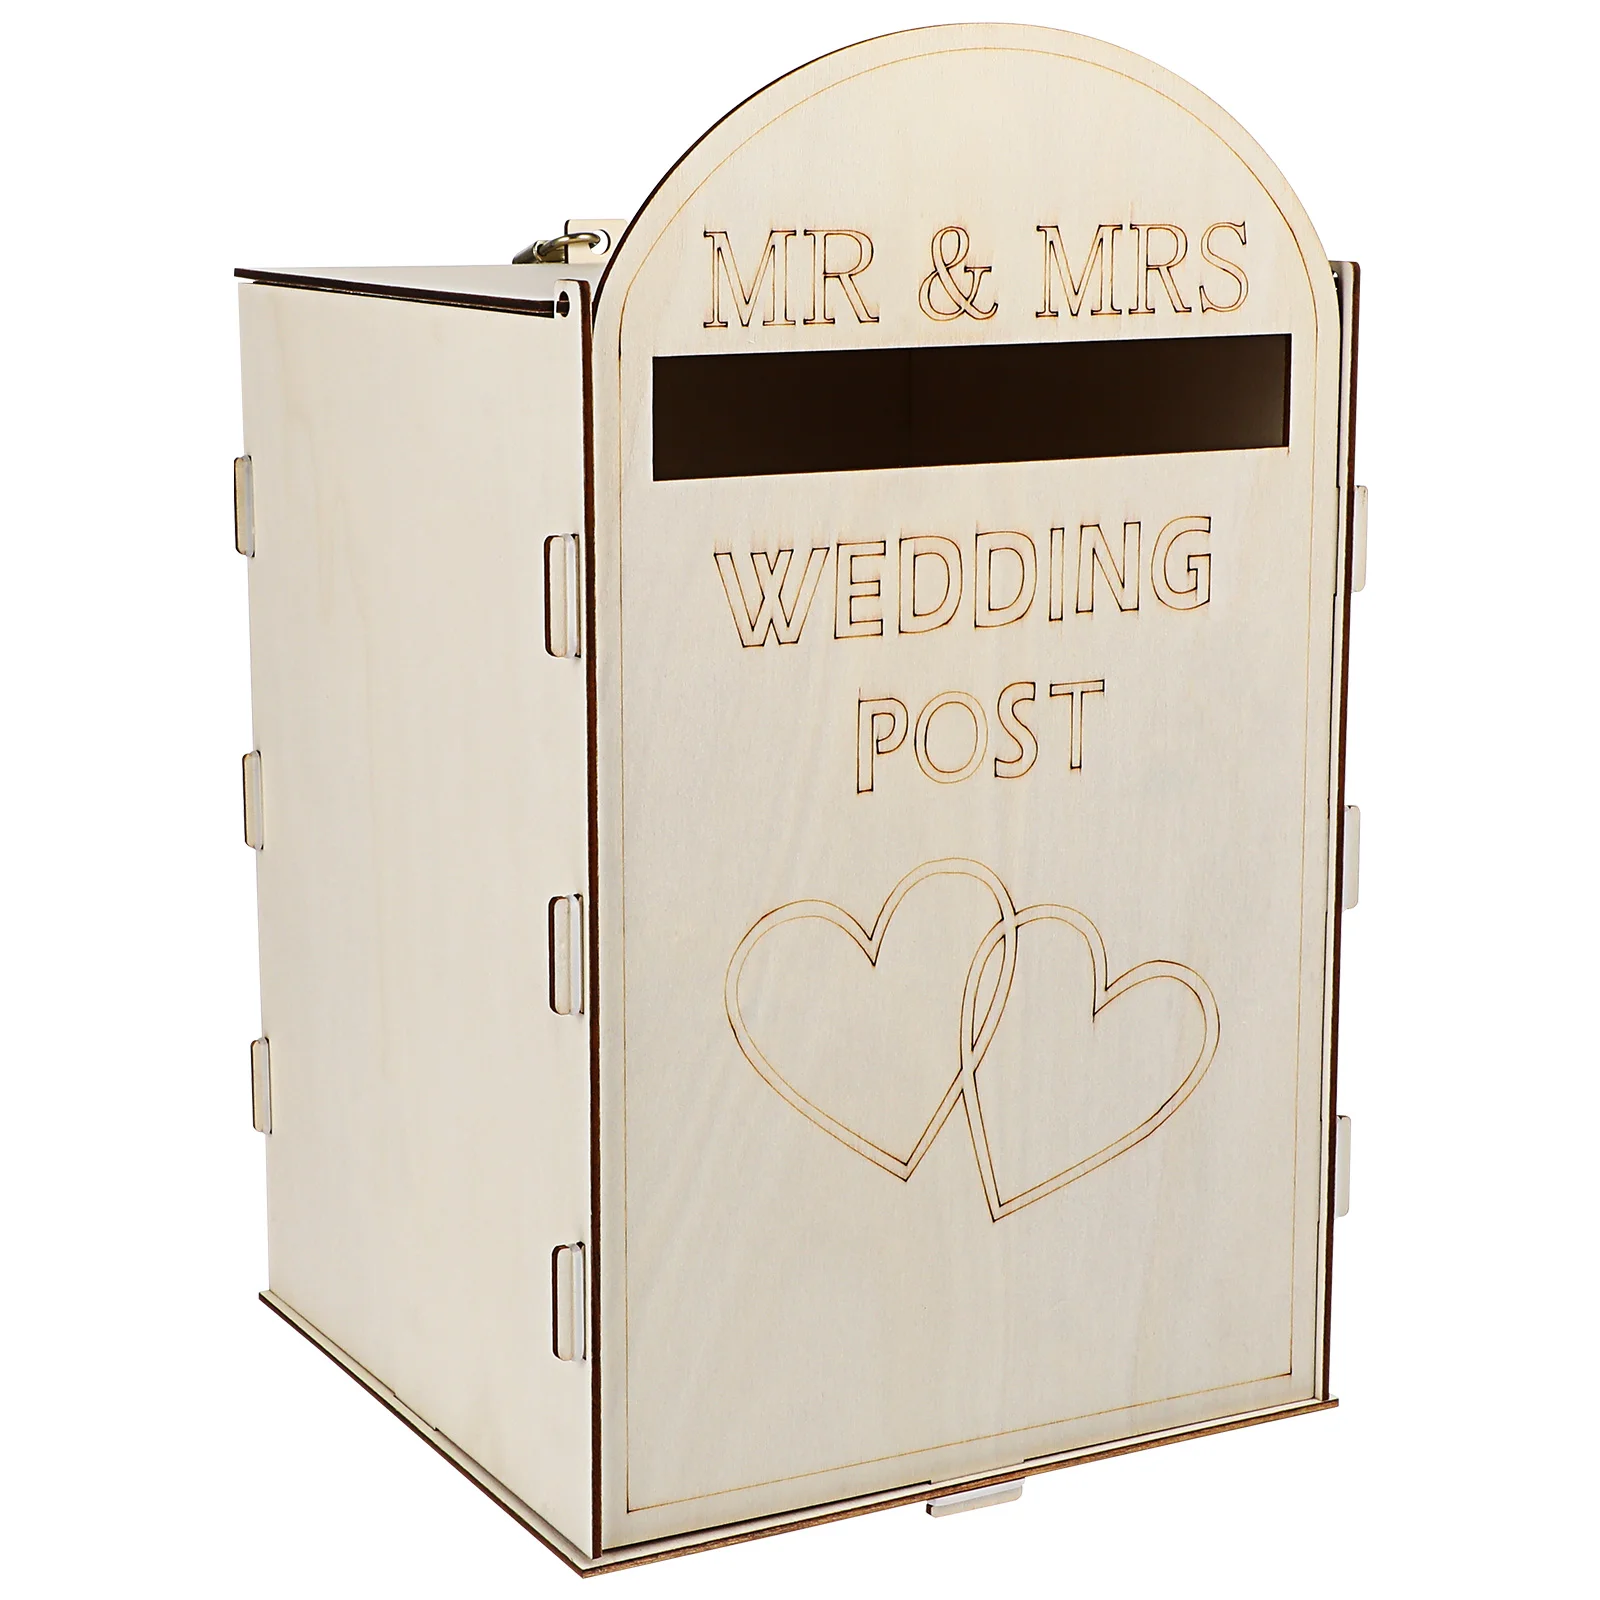 

Wedding Wooden Post Box Wedding Box Decorative Gift Box Rustic Wedding Party Envelope Box for Reception ( With a Key )